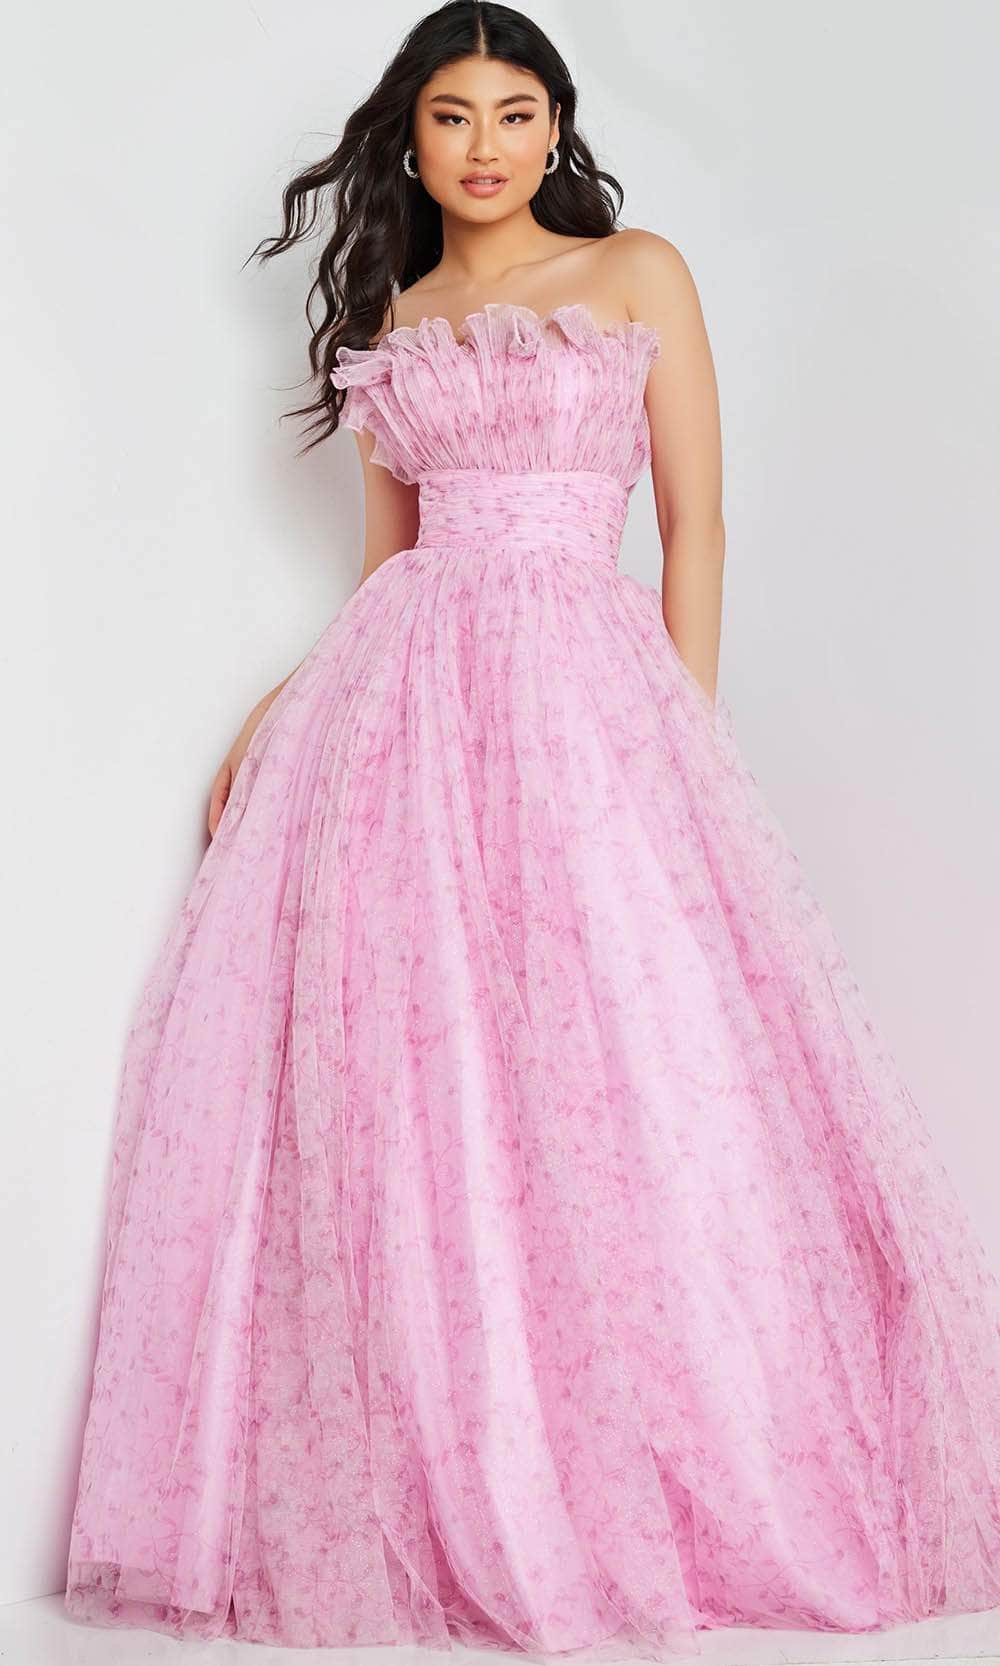 JVN by Jovani JVN26209 - Ruffled Neck Strapless Ballgown Special Occasion Dress 00 / Pink